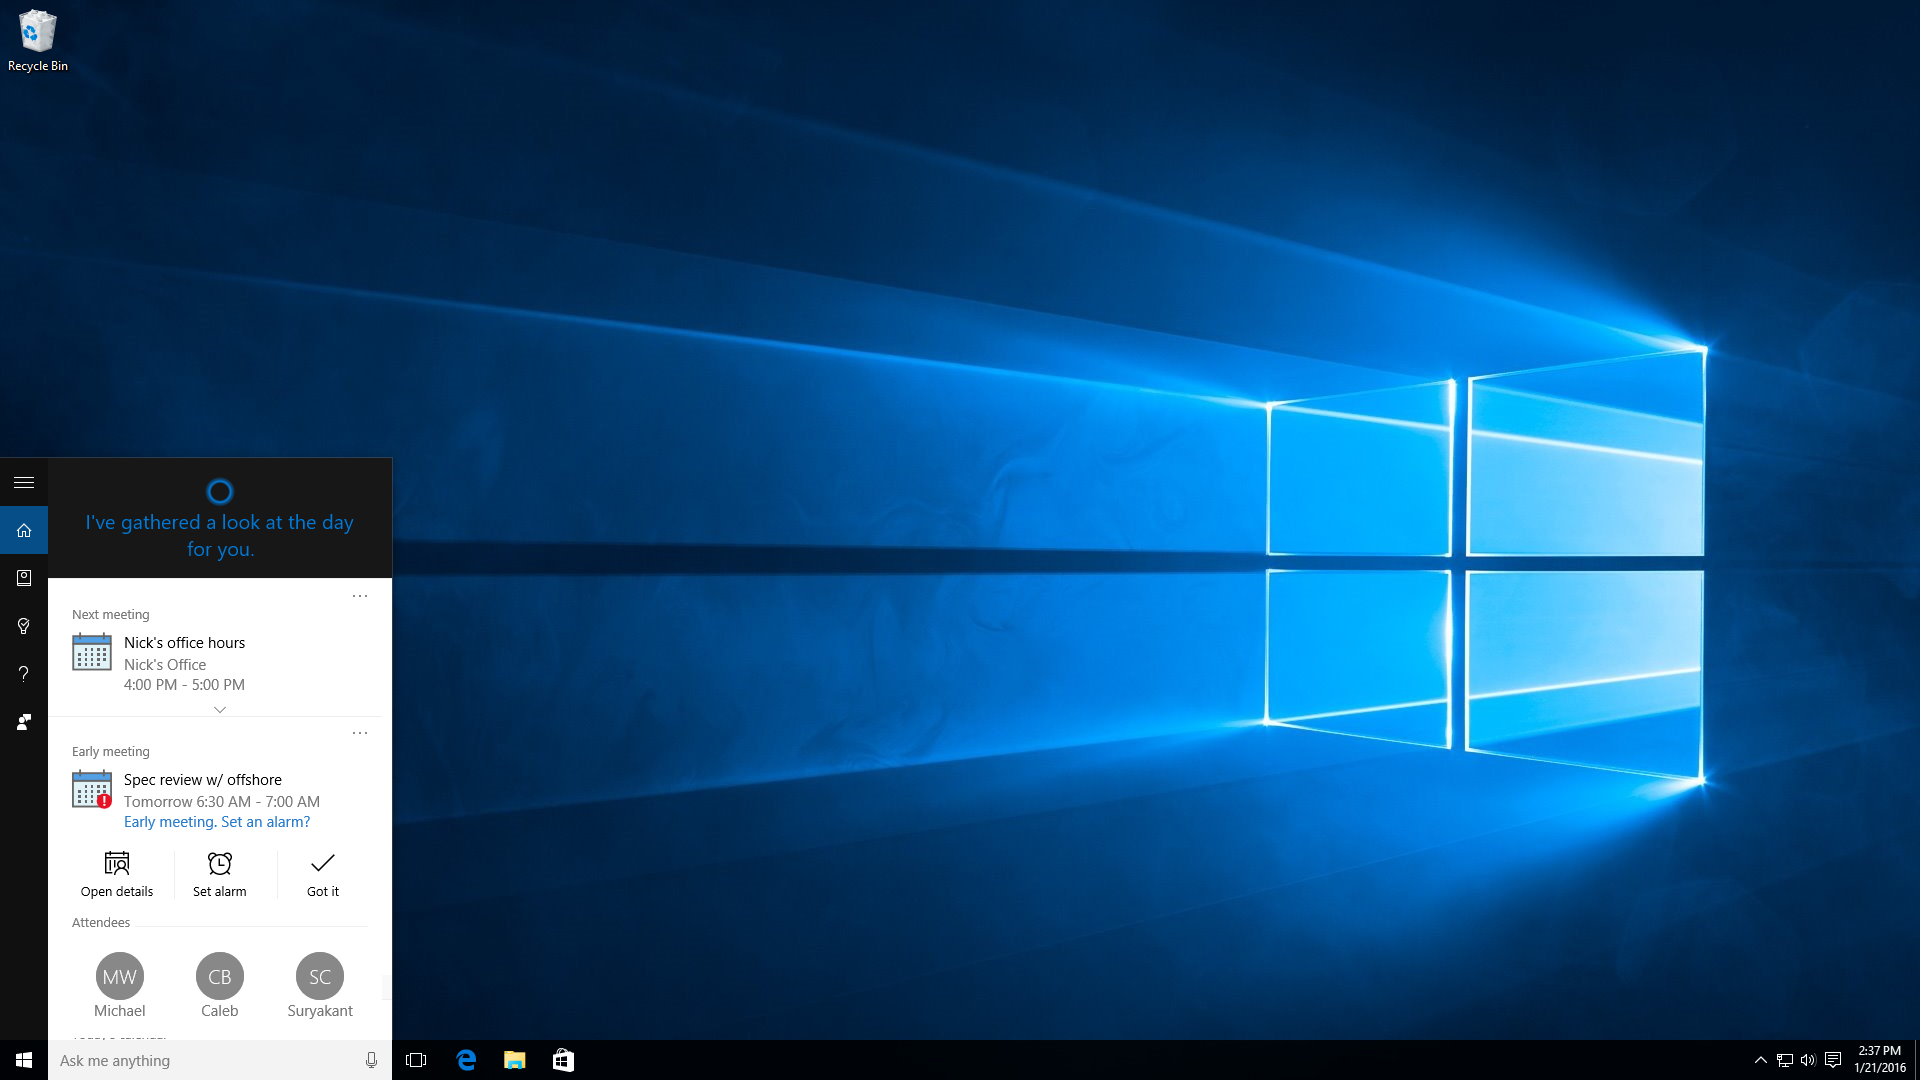 Windows 10's Cortana will remind you to keep promises made in emails